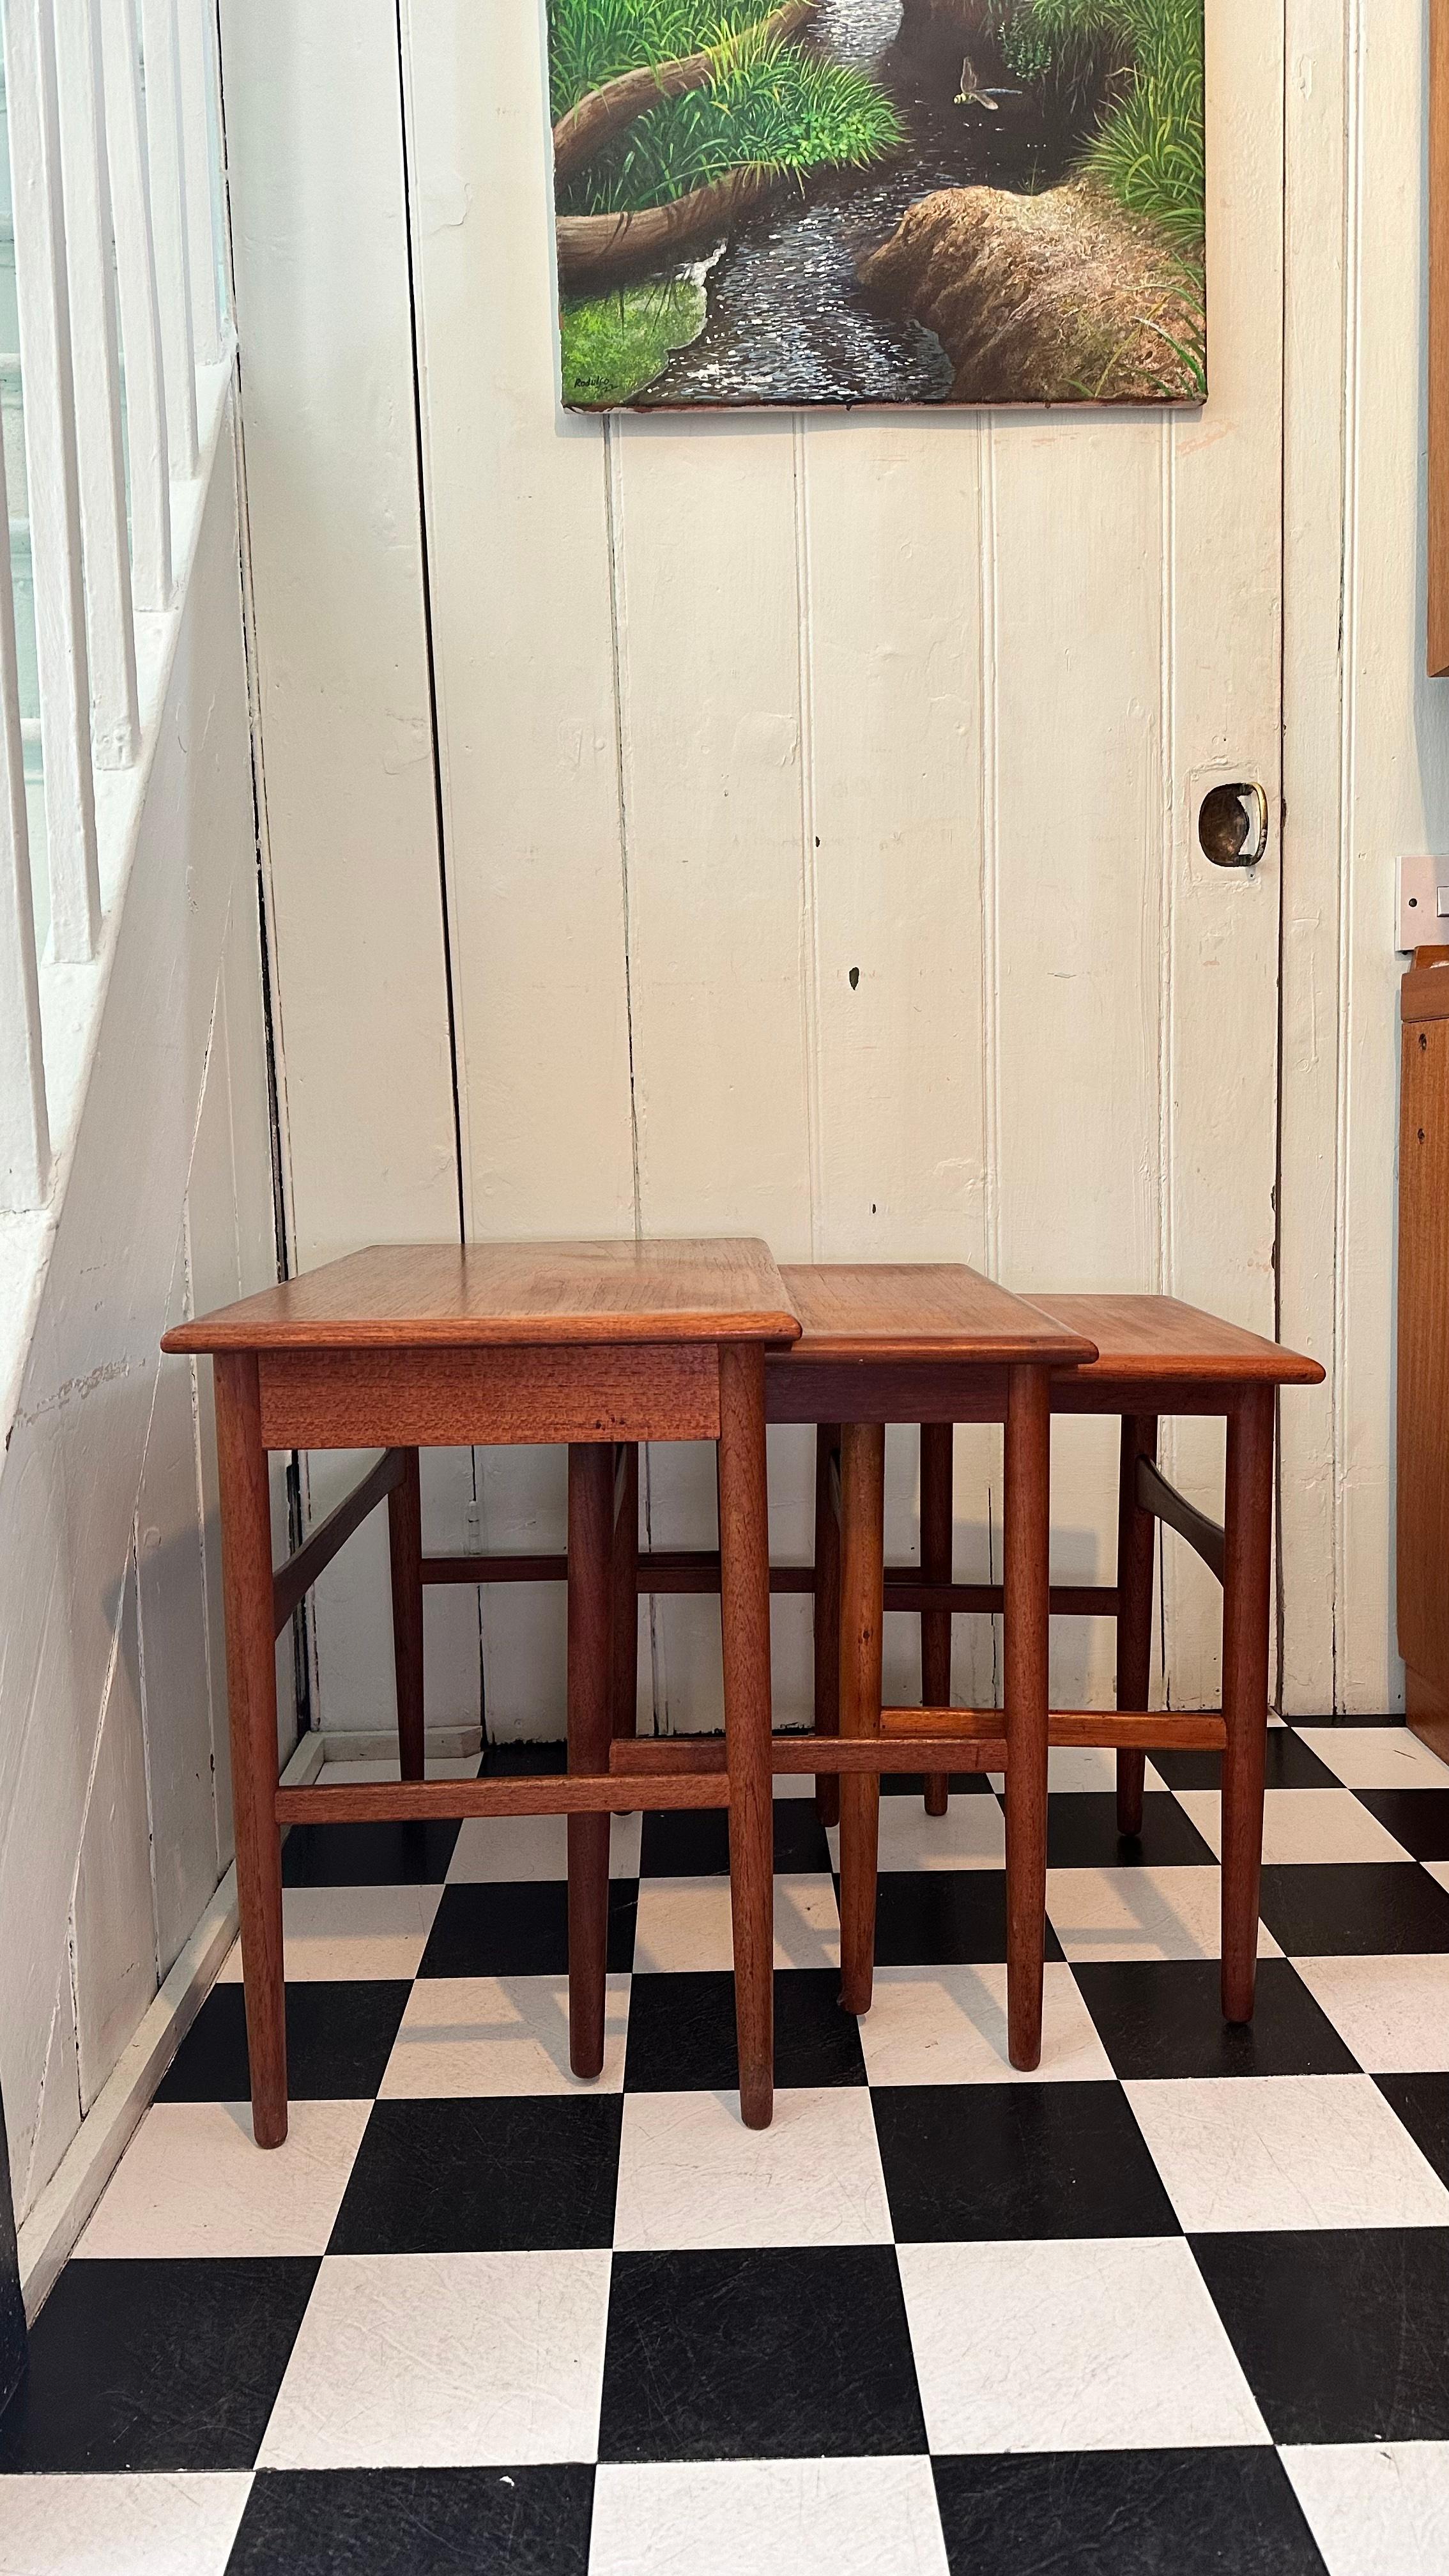 We’re happy to provide our own competitive shipping quotes with trusted couriers. Please message us with your postcode for a more accurate price. Thank you.

Mid-century modern teak nest of tables by Kai Kristiansen. Gorgeous design, this set